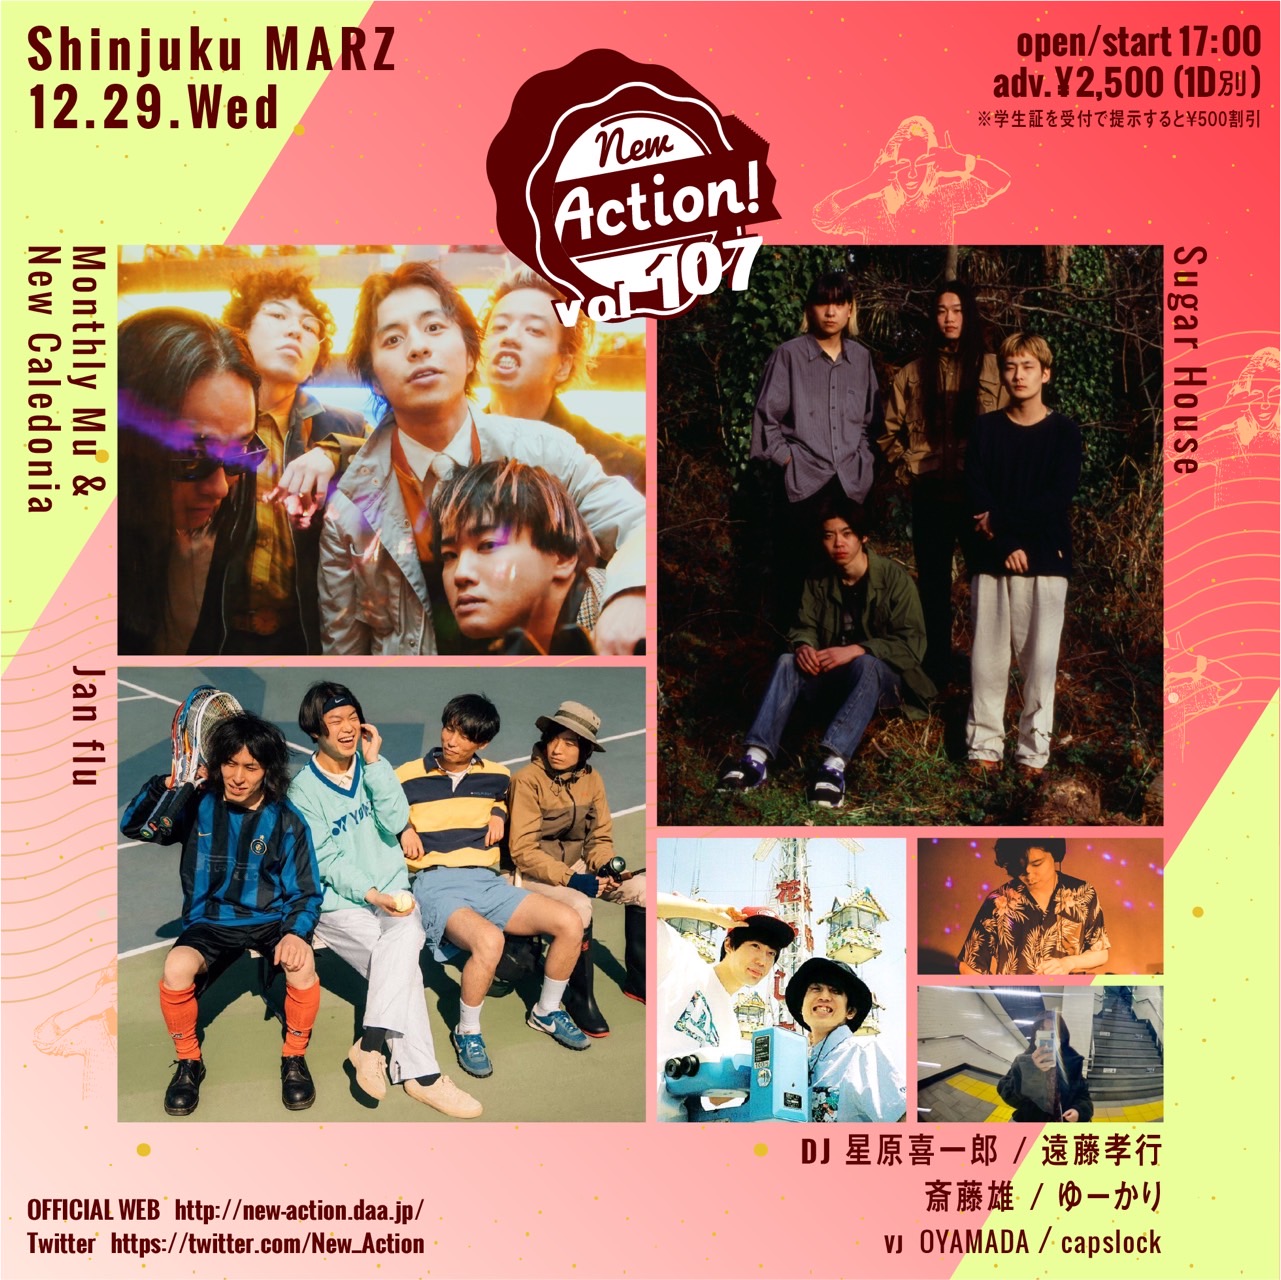 New Action! Vol.107